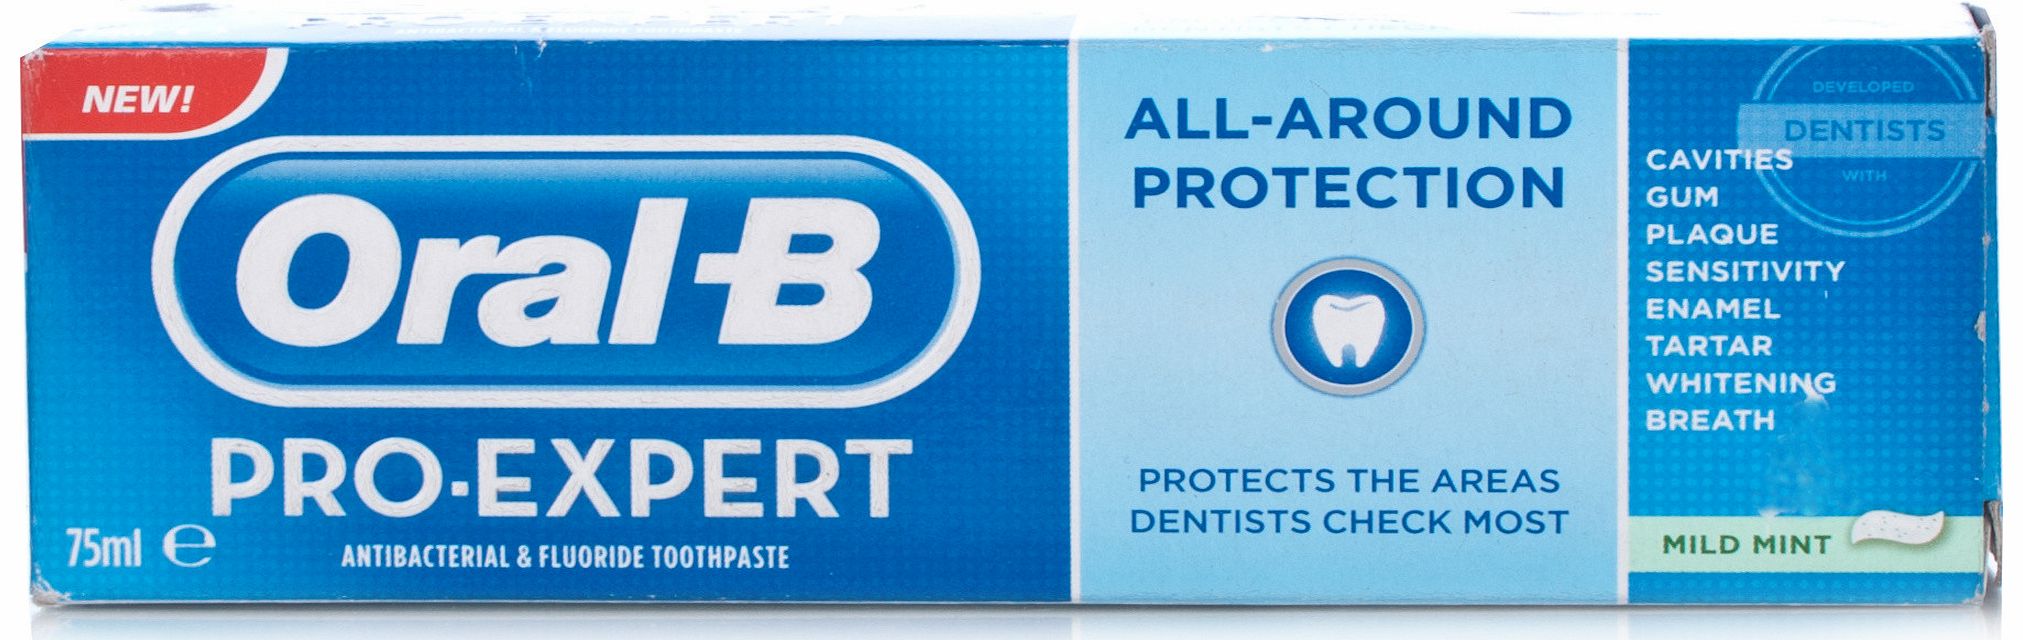 Oral B Oral-B Pro Expert All Around Protection Mild